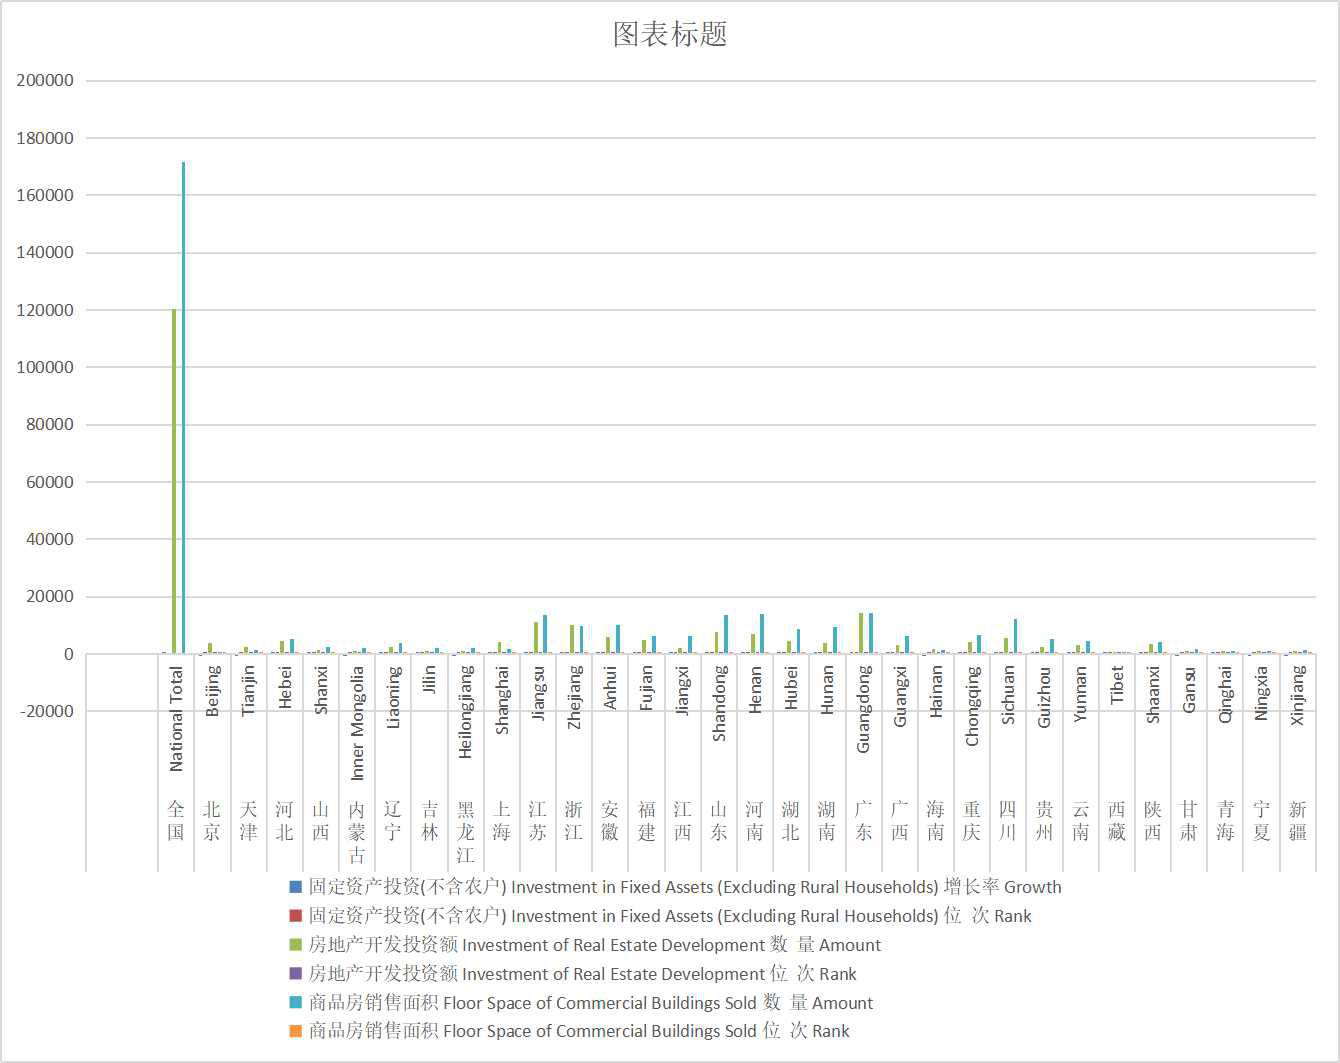 Investment and growth rate of fixed assets in different regions of China (2001-2018)